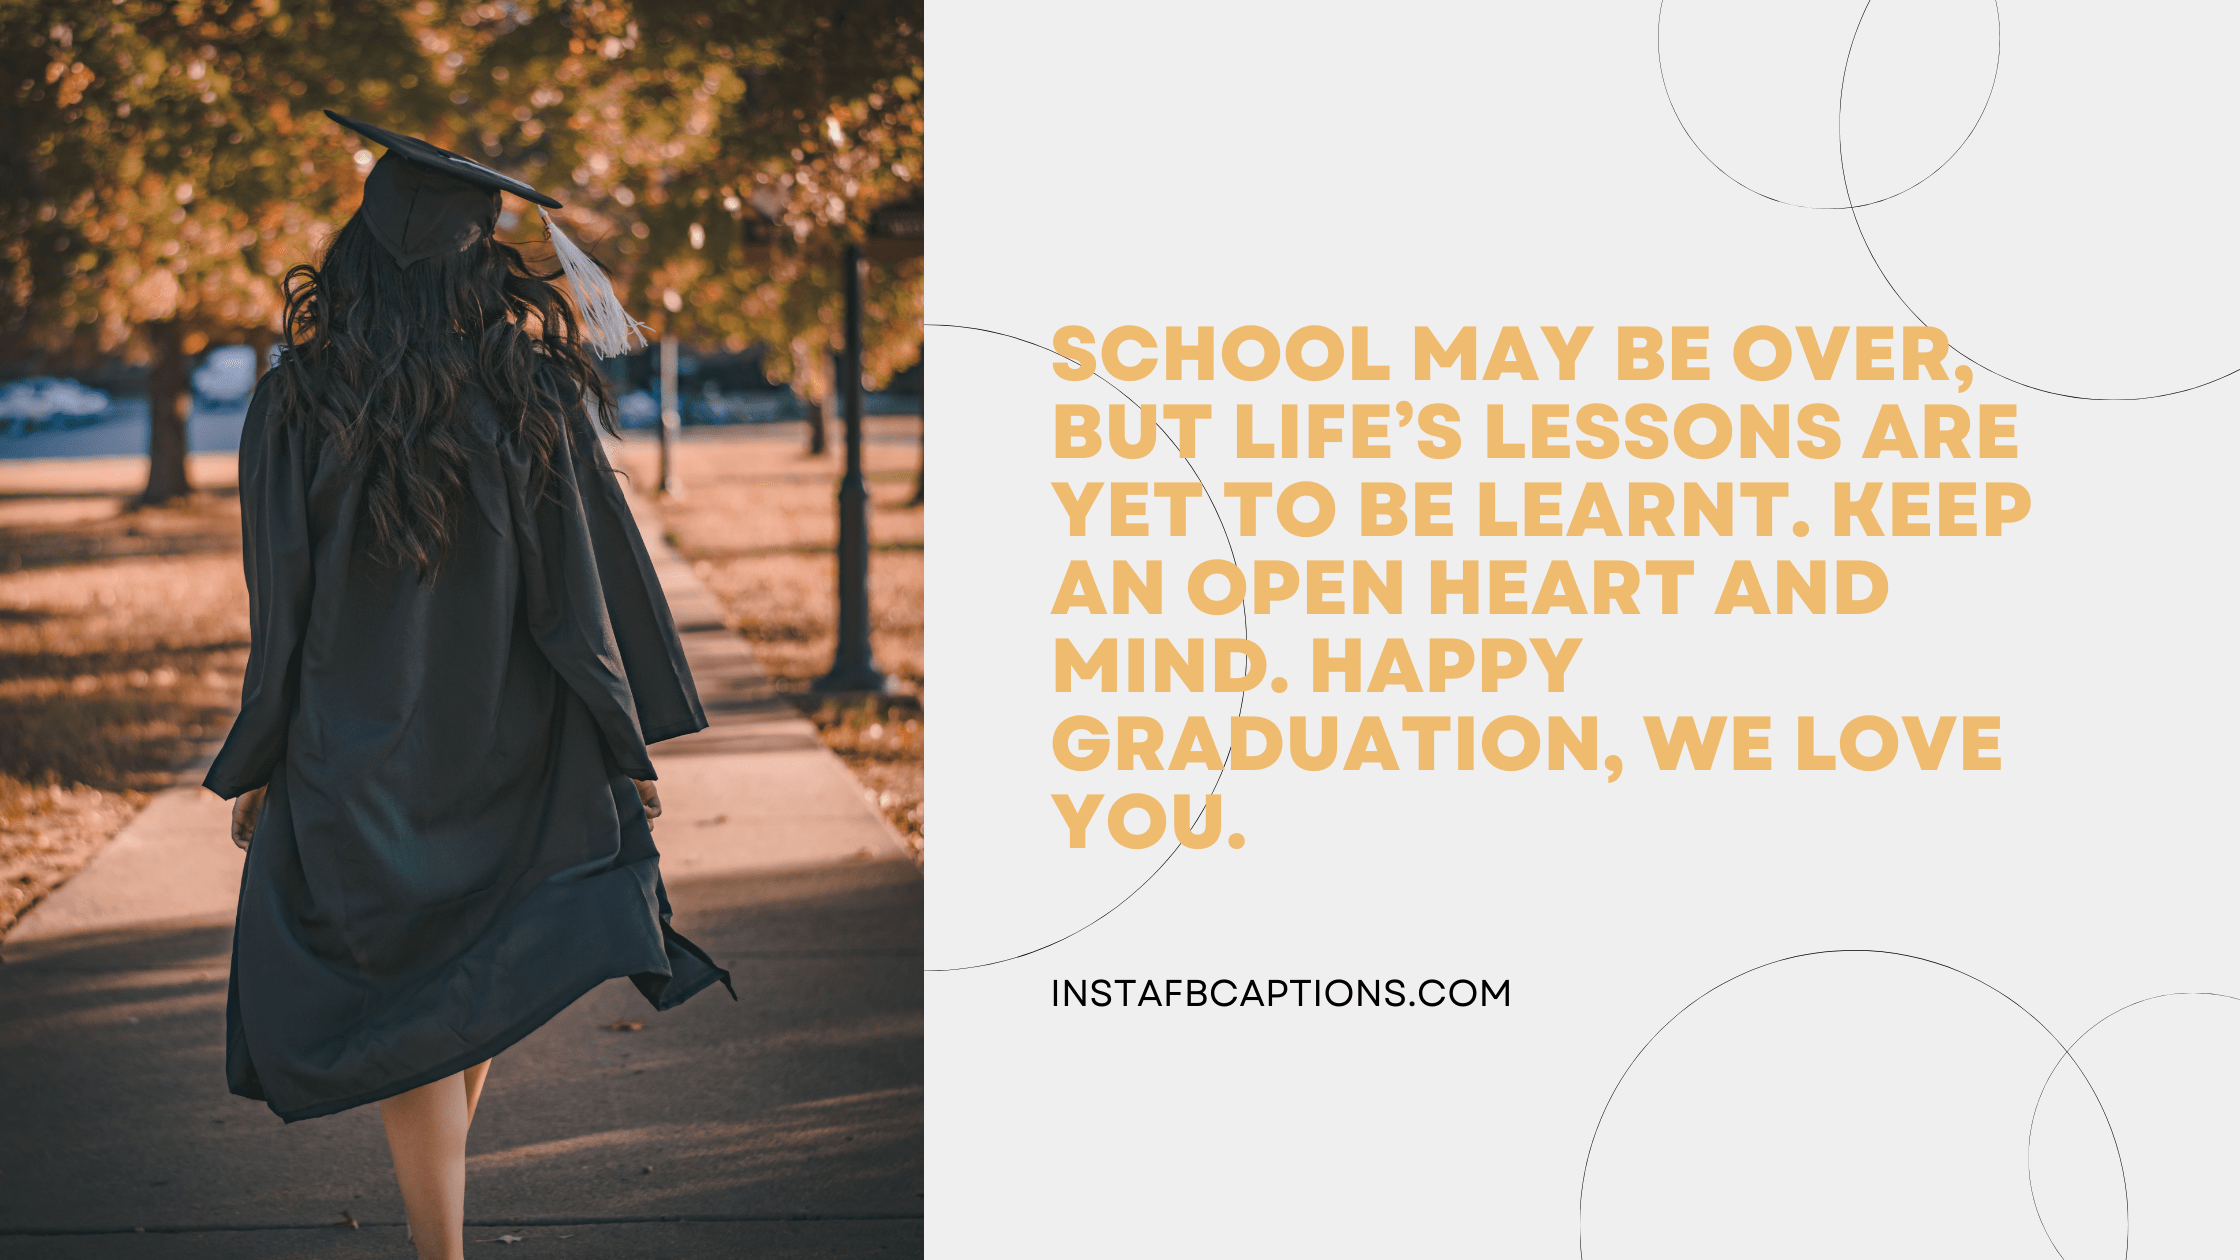 School may be over, but life’s lessons are yet to be learned. Keep an open heart and mind. Happy graduation, we love you. graduation captions - Graduation Wishes from Parents - 420+ Classy Graduation Instagram Captions To Commemorate